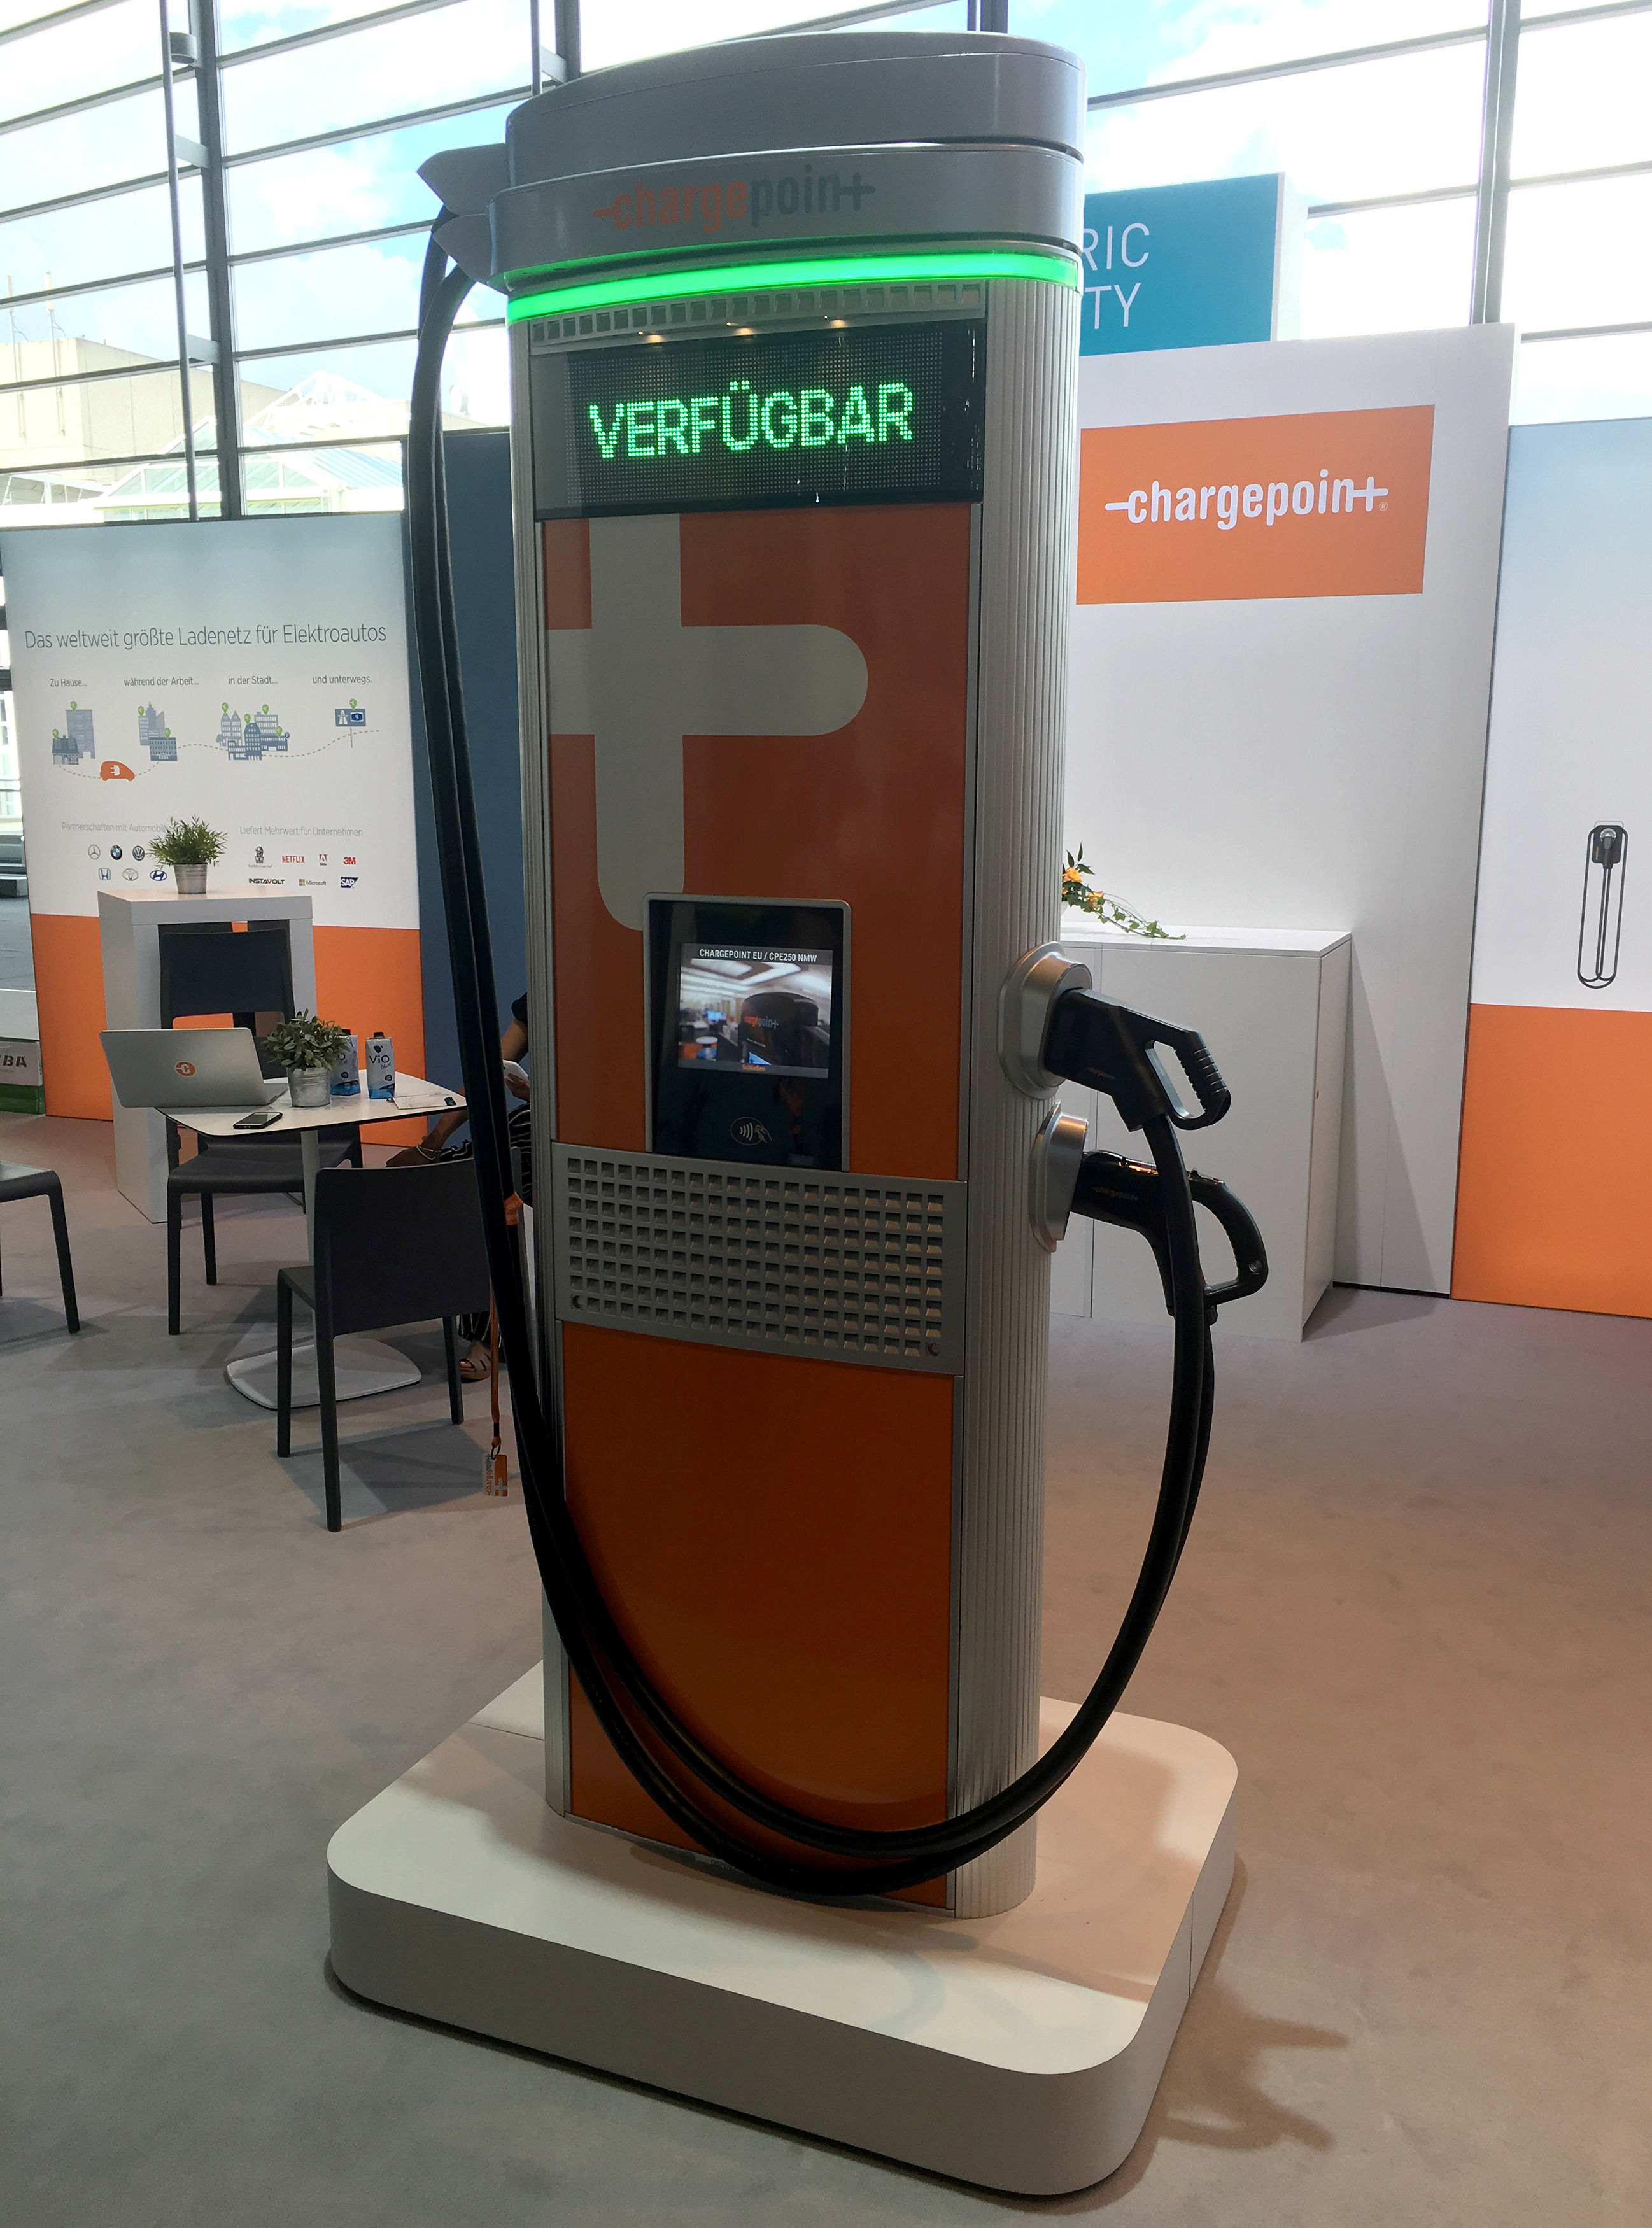 A ChargePoint station on display at the Frankfurt Motor Show (IAA) in Frankfurt